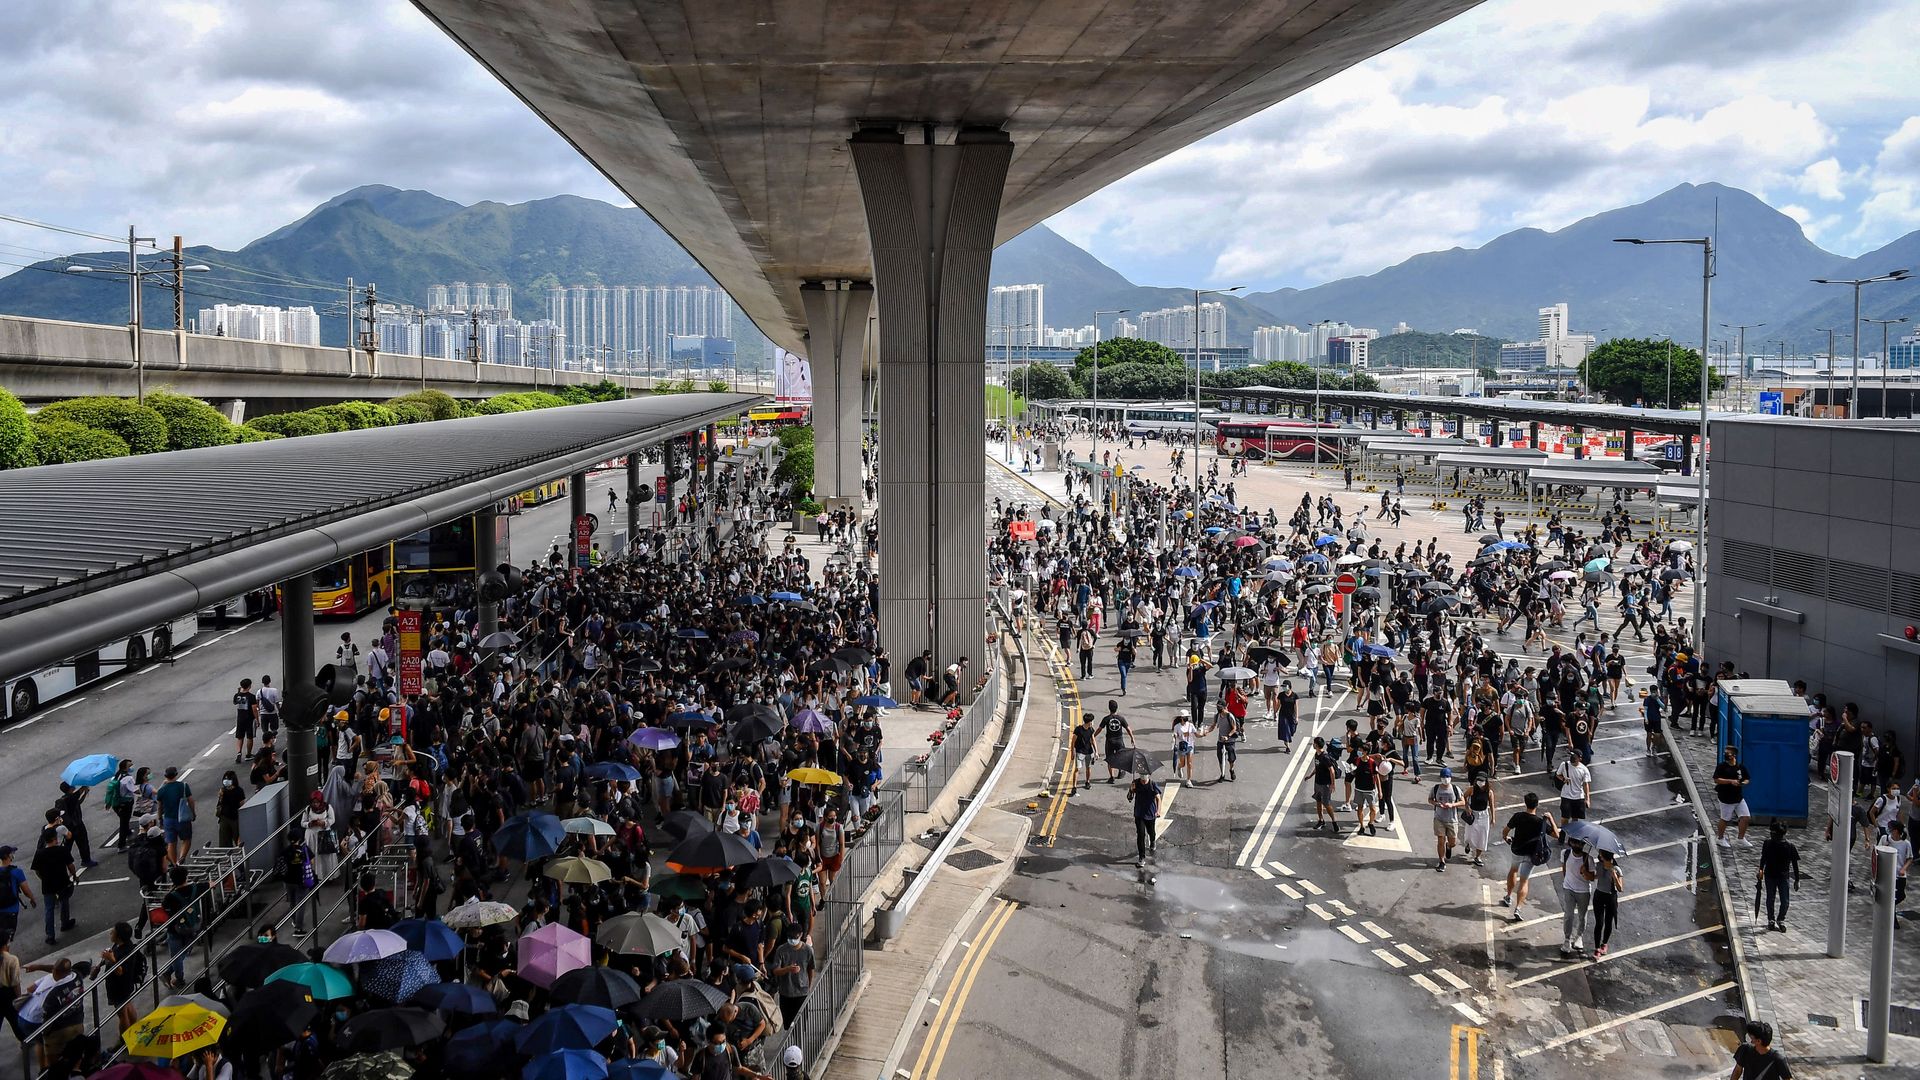  Protesters gather in the bus terminal at Hong Kong International Airport on September 1